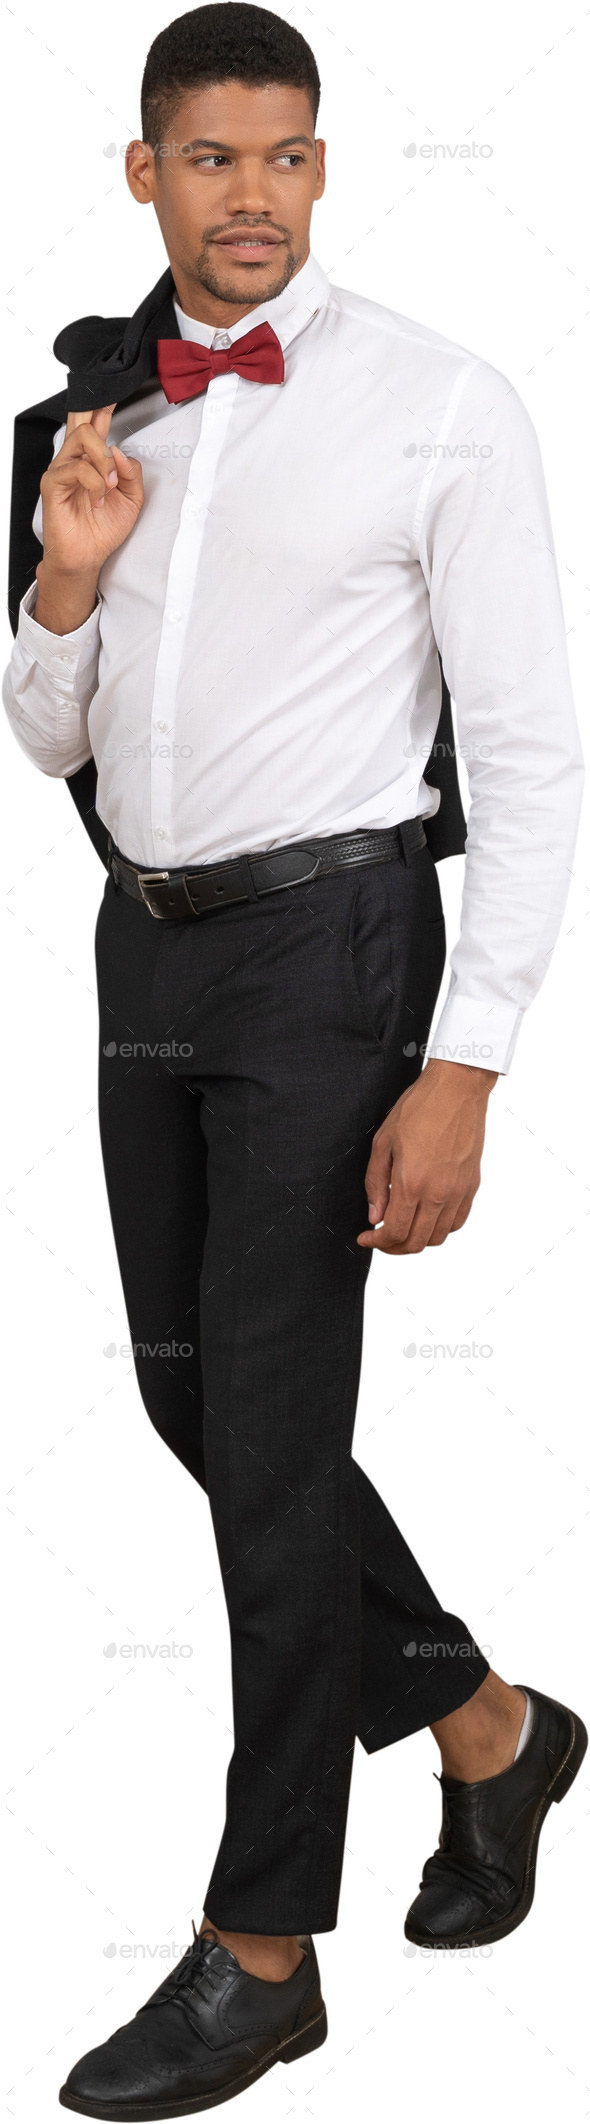 A Man In A White Shirt And Red Bow Tie And Black Pants Stock Photo By Icons8